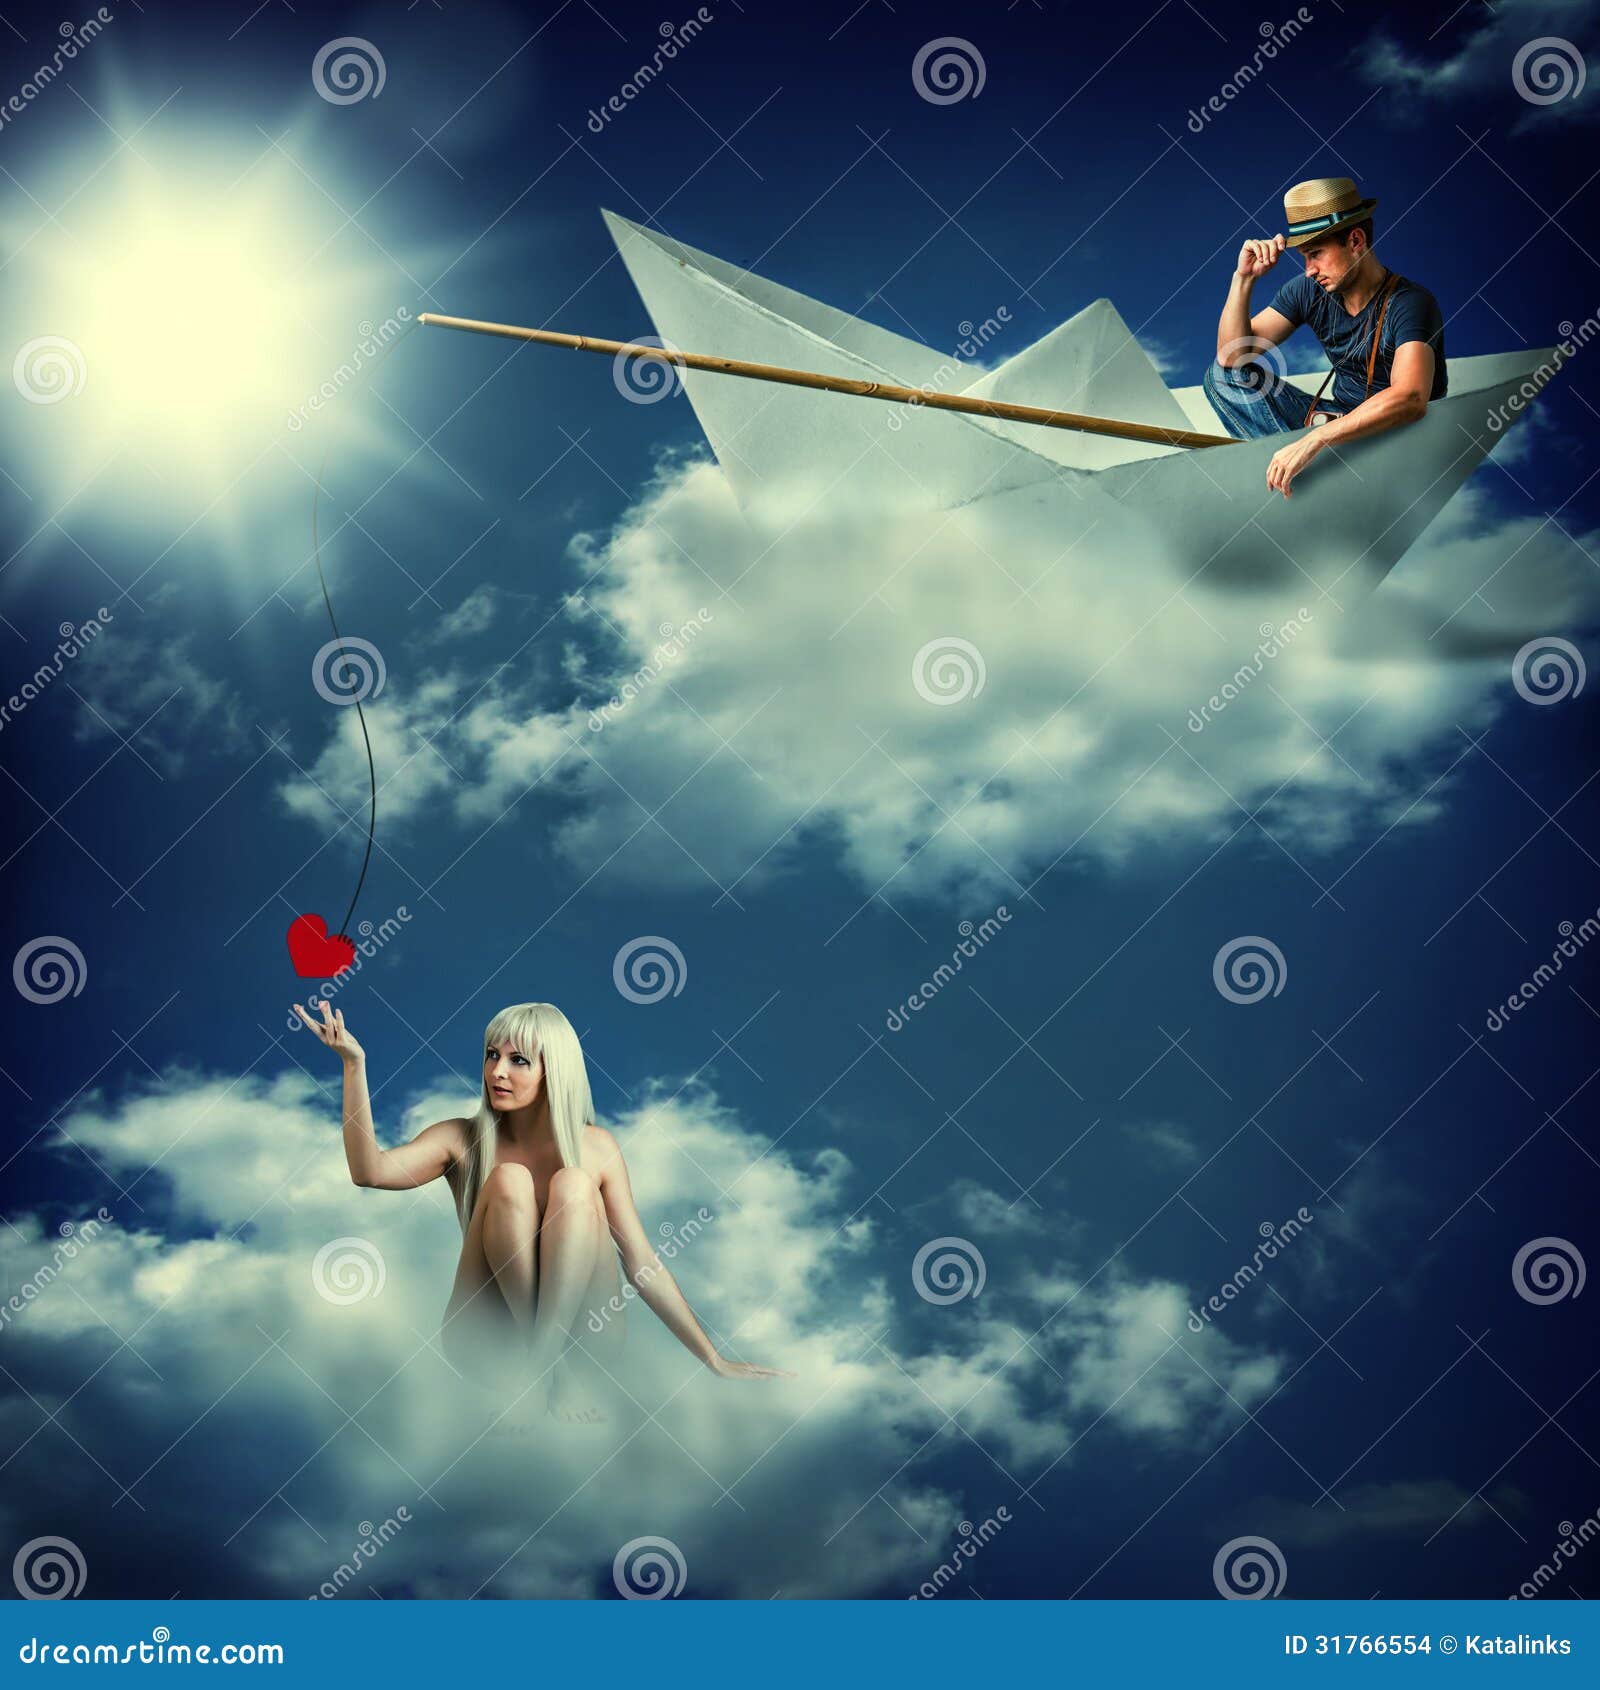 Man Catching Bait Of Beautiful Woman Stock Images - Image: 31766554